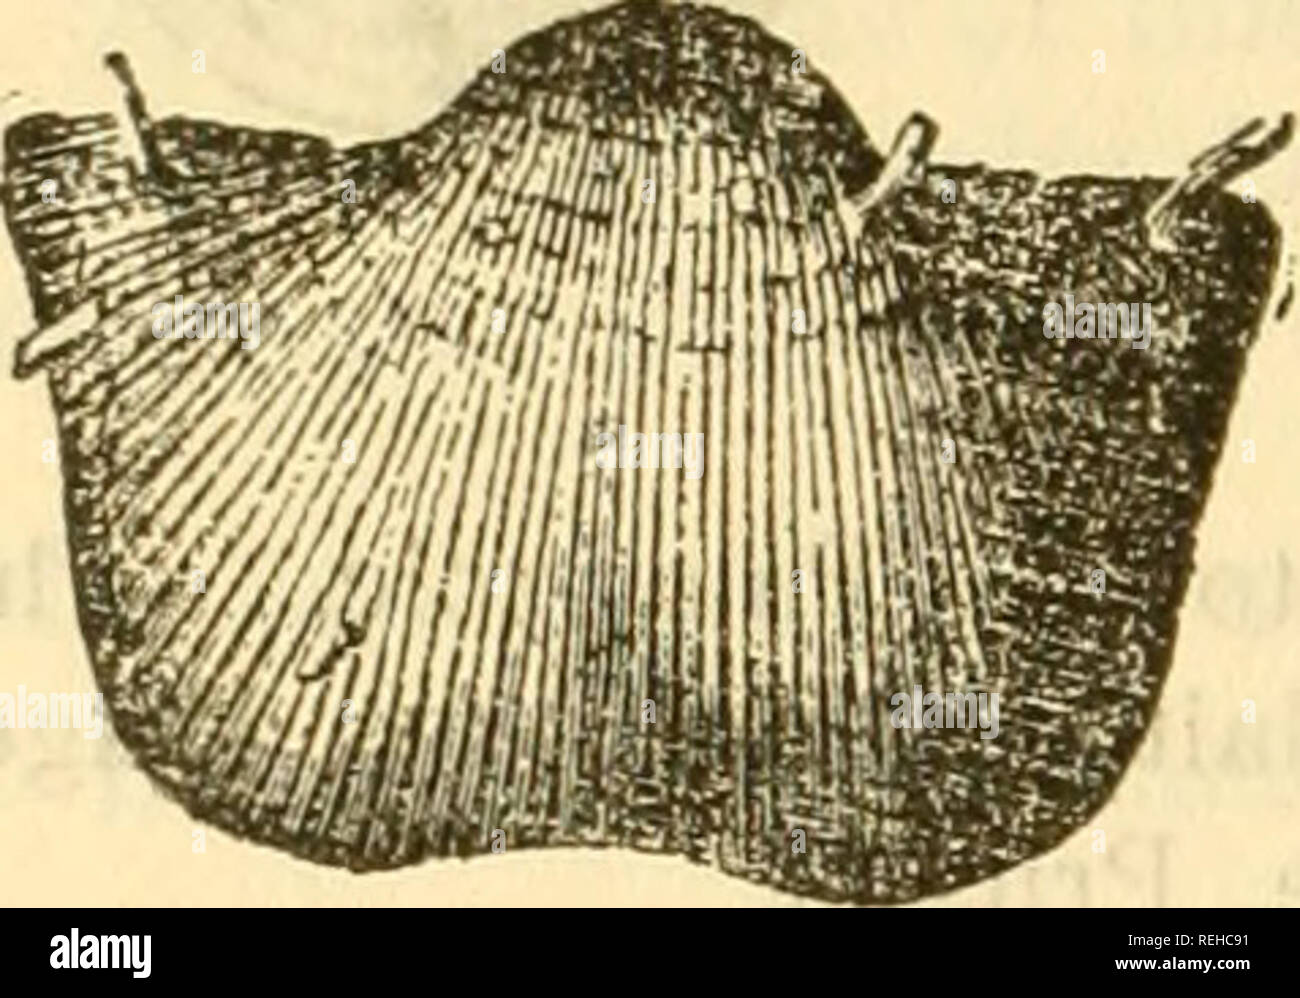 . College collection of palaeontology. 132 M0LLU8CA. No, 401. Productus horridus, Gein. The members of this genus were mostly free when adult. The shell is auriculate, large beaked, and with linear indistinct hinge-line; no hinge teeth; 81 species. Permian, Gera, Saxony. No. 403. Productus longispinus, Sow. Carboniferous, near Peru, 111. No. 403. Productus Prattenianus, Norwood. Coal Measures, Knox Co., 111. No. 404. Productus semireticulatus, Mart. Carboniferous Limestone, Longniddy, near Edinburgh, Scotland.. Please note that these images are extracted from scanned page images that may have  Stock Photo